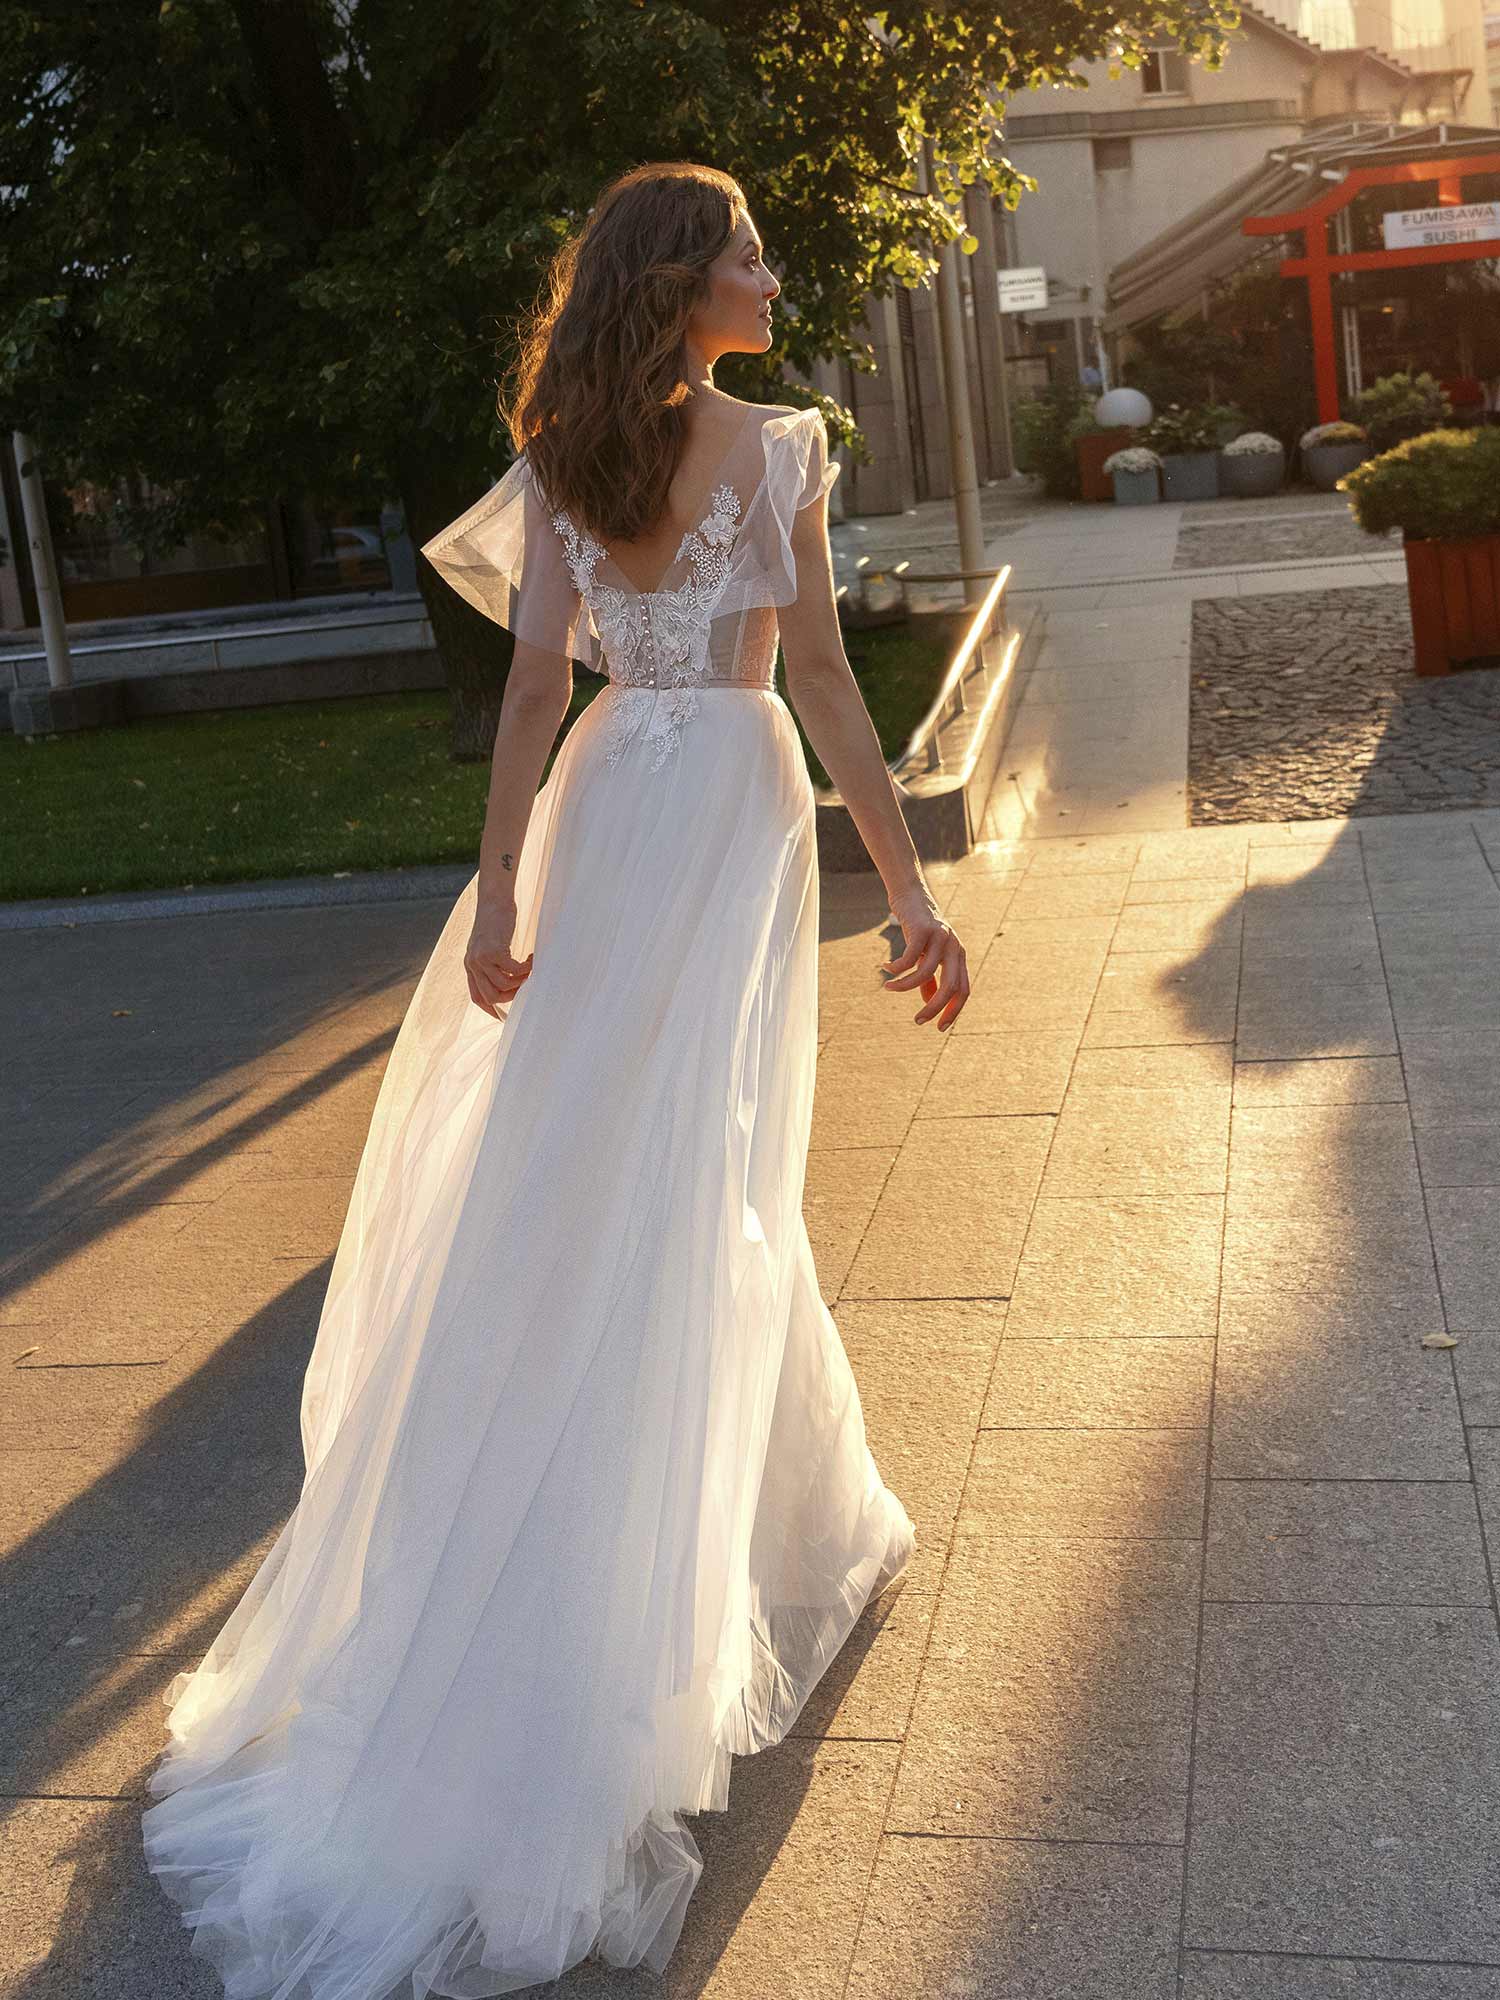 Cape sleeved wedding dress with illusion neckline and floral appliqué ...